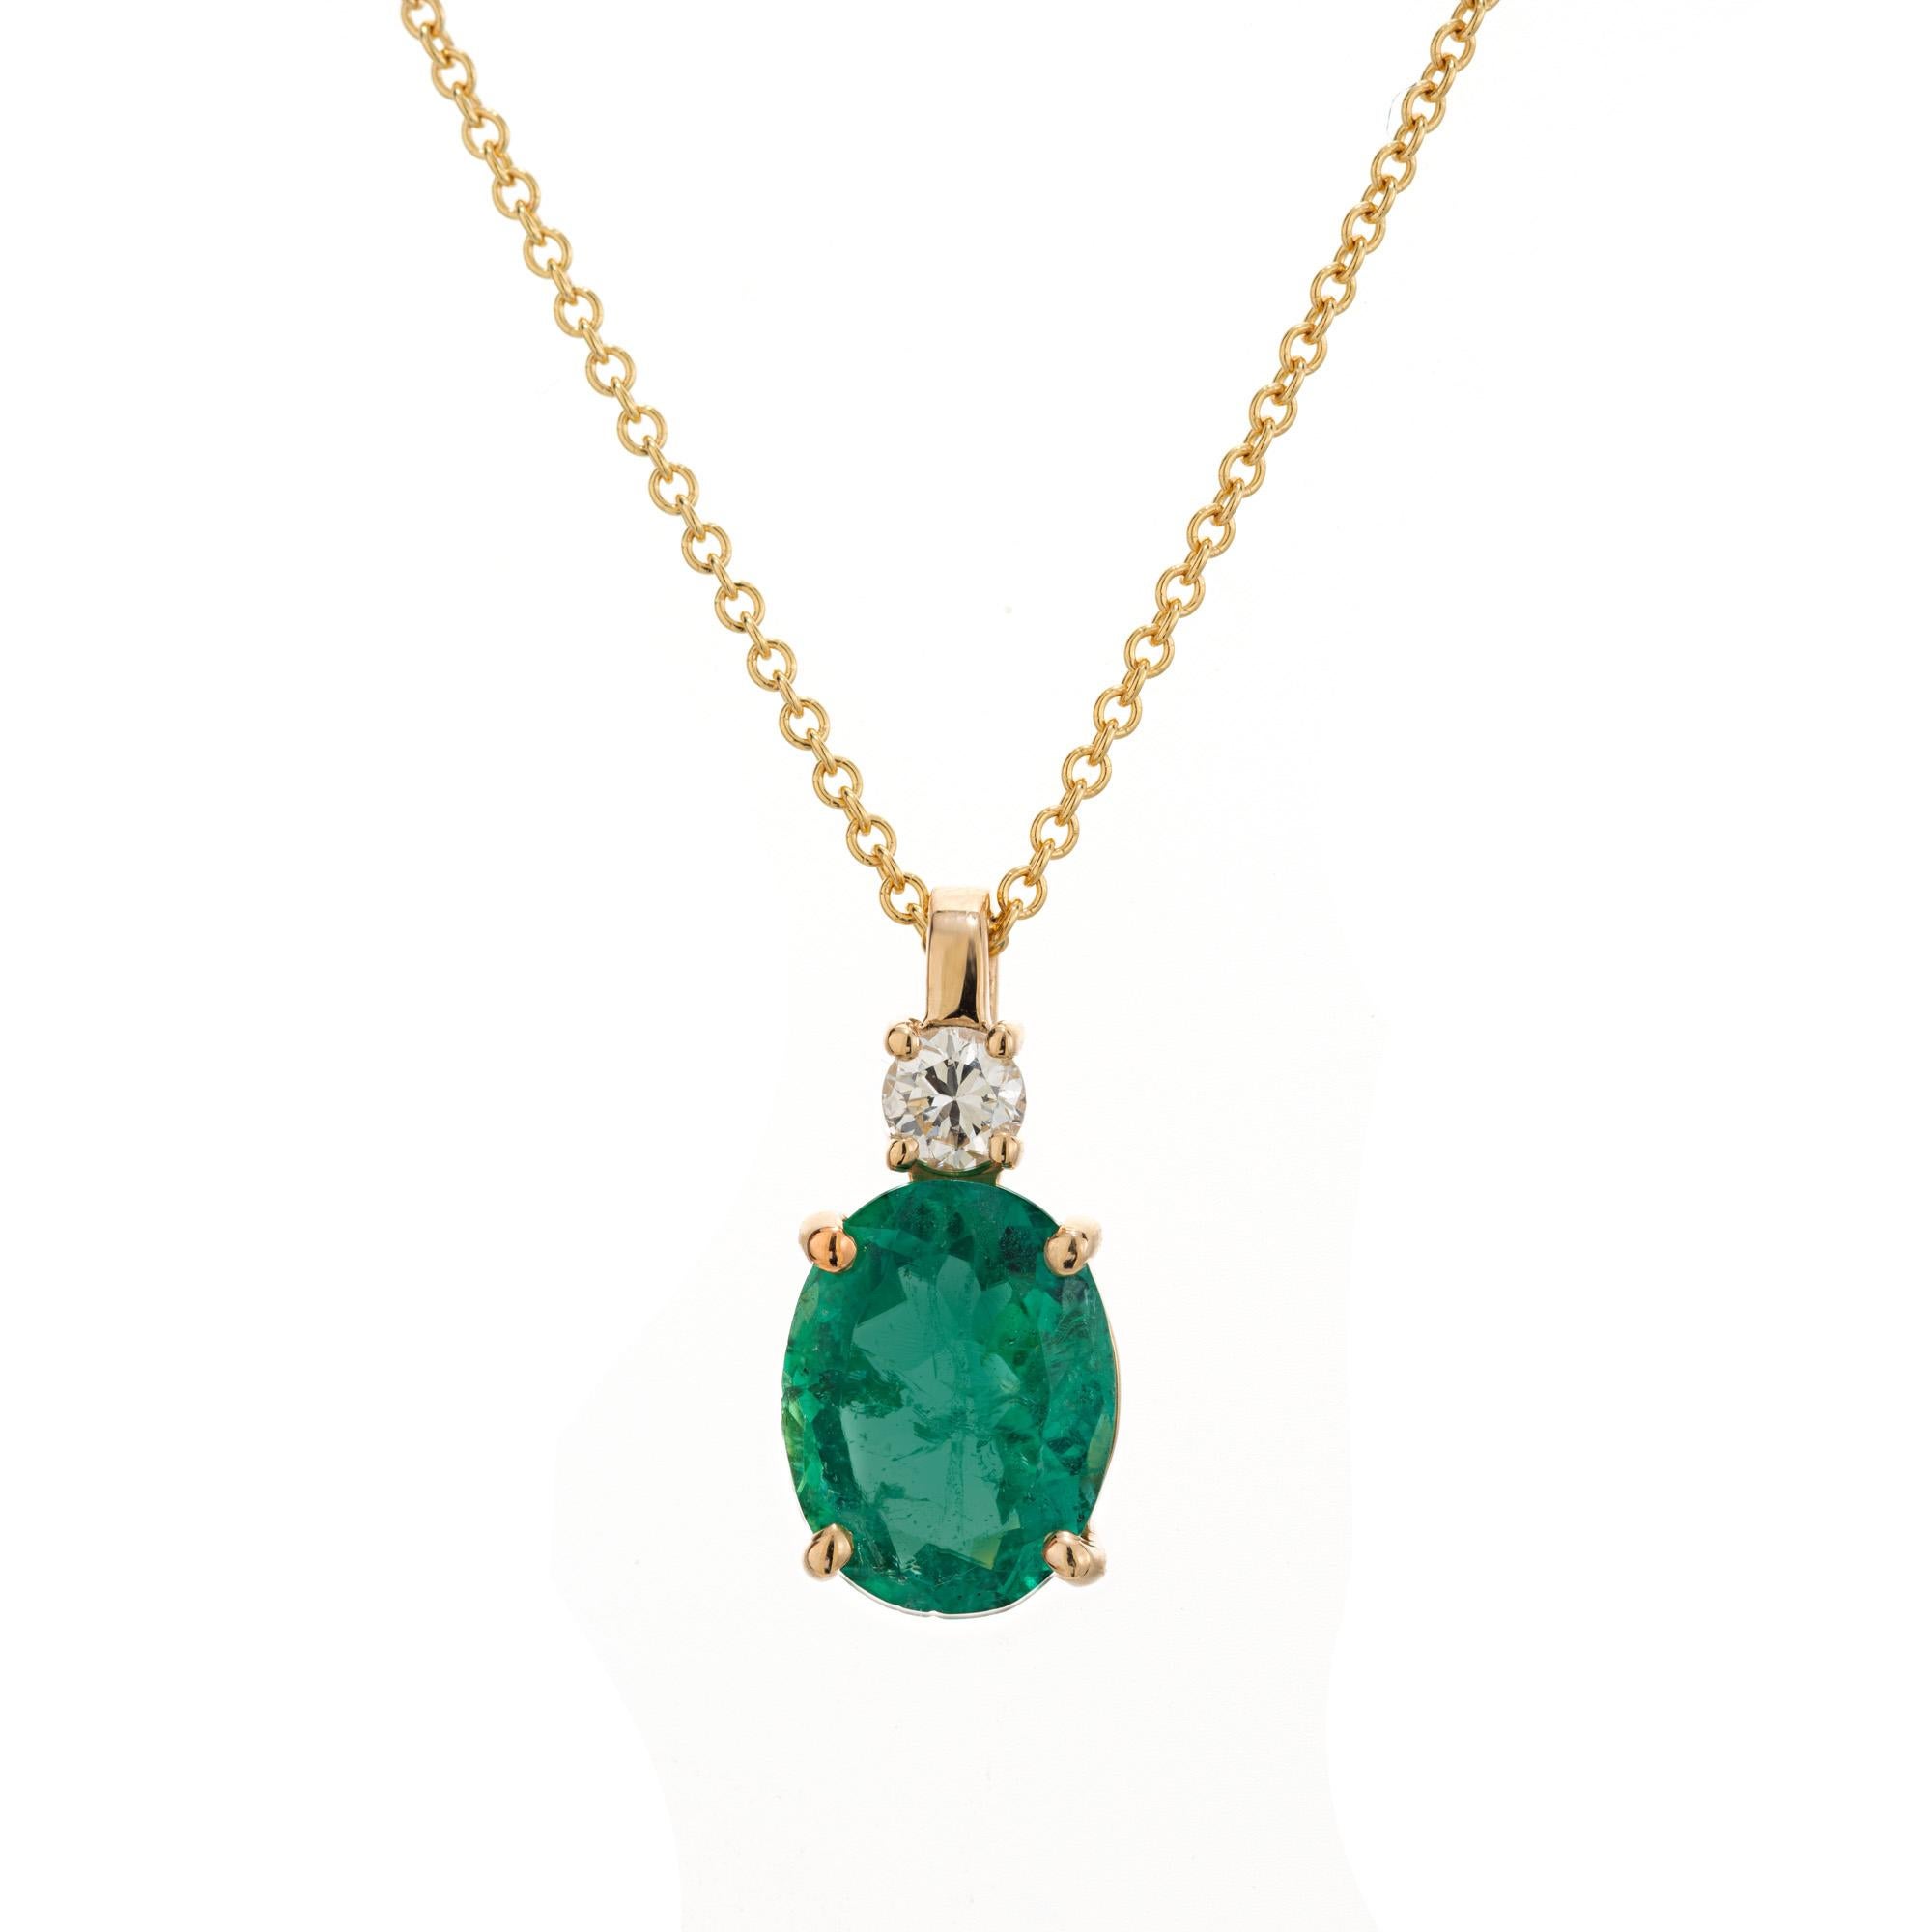 Rich green emerald and diamond pendant necklace. GIA certified oval 2.63 carat emerald mounted in a simple 4 prong, 14k yellow gold setting and accented with 1 round brilliant cut diamond. 16 inch 14k yellow gold chain. The GIA has certified this